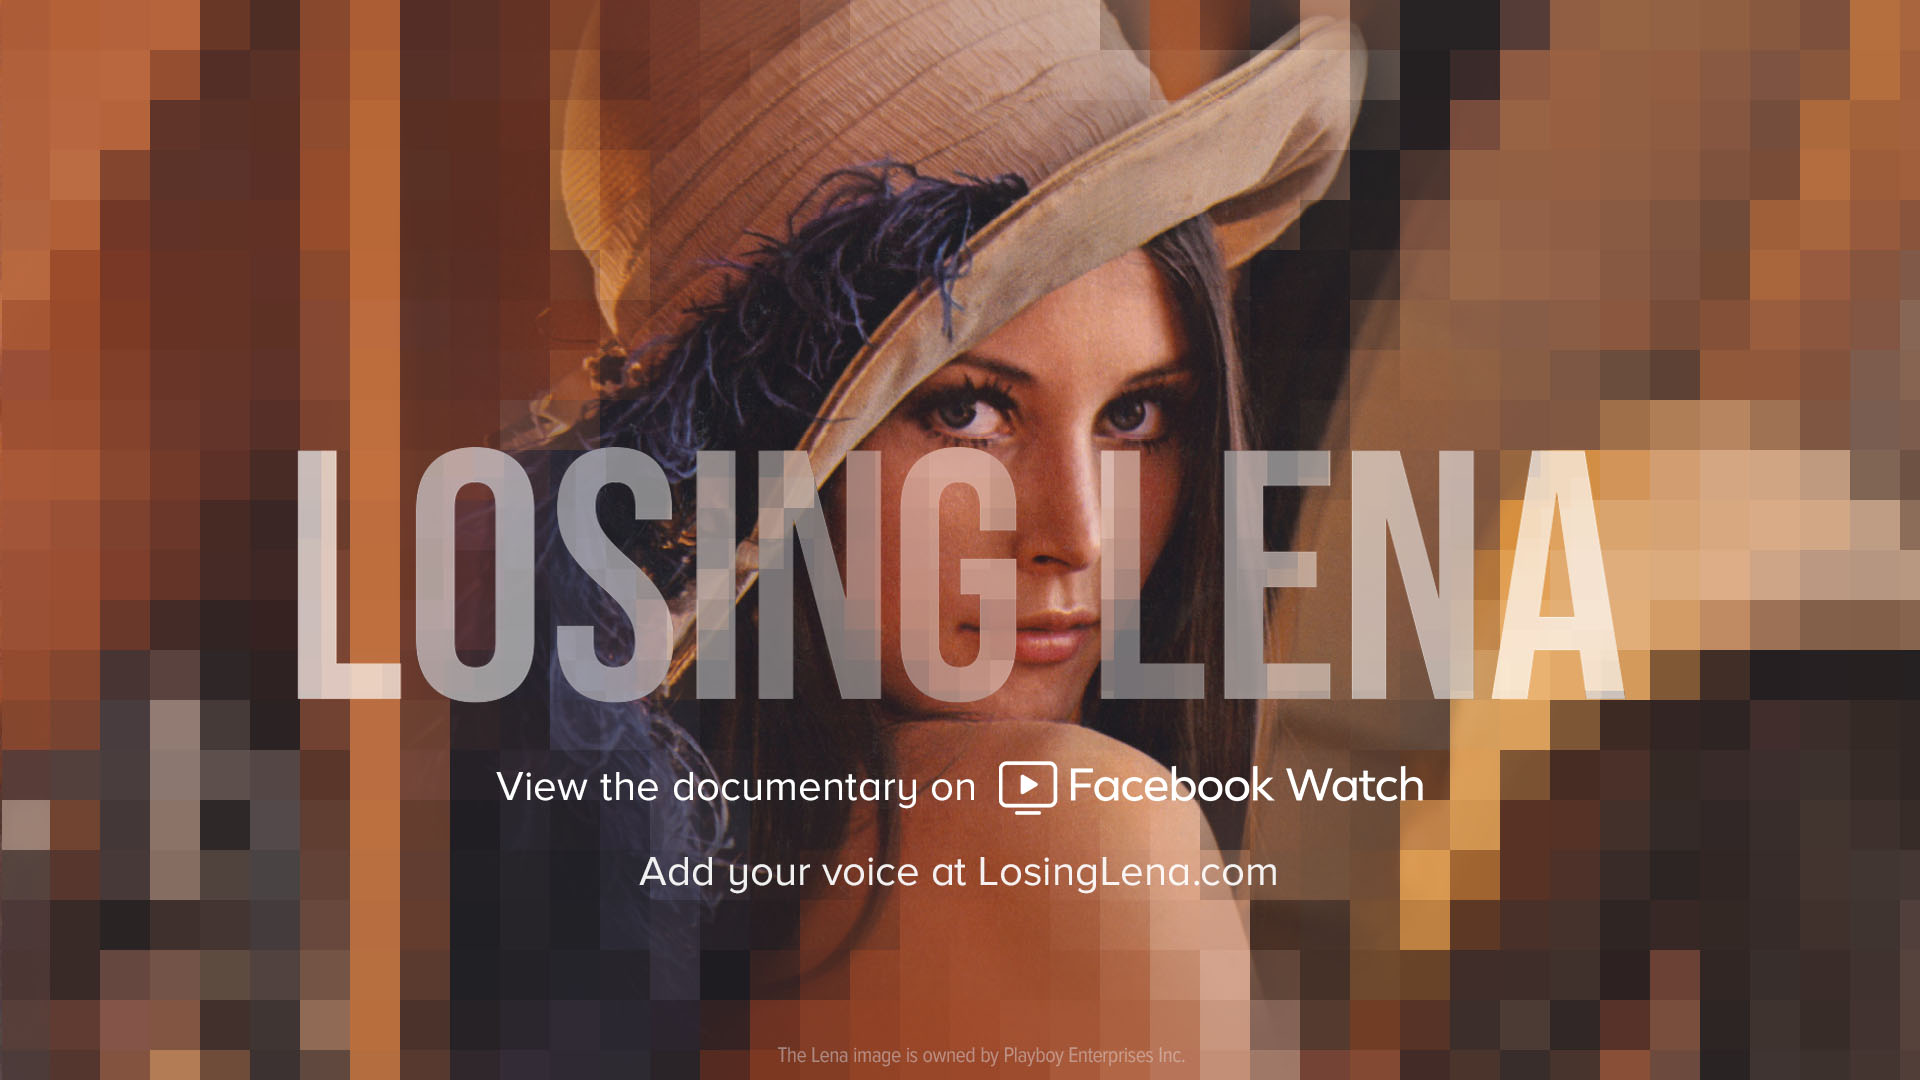 Creatable and Code Like a Girl’s ‘Losing Lena’ Documentary Launches on Facebook Watch